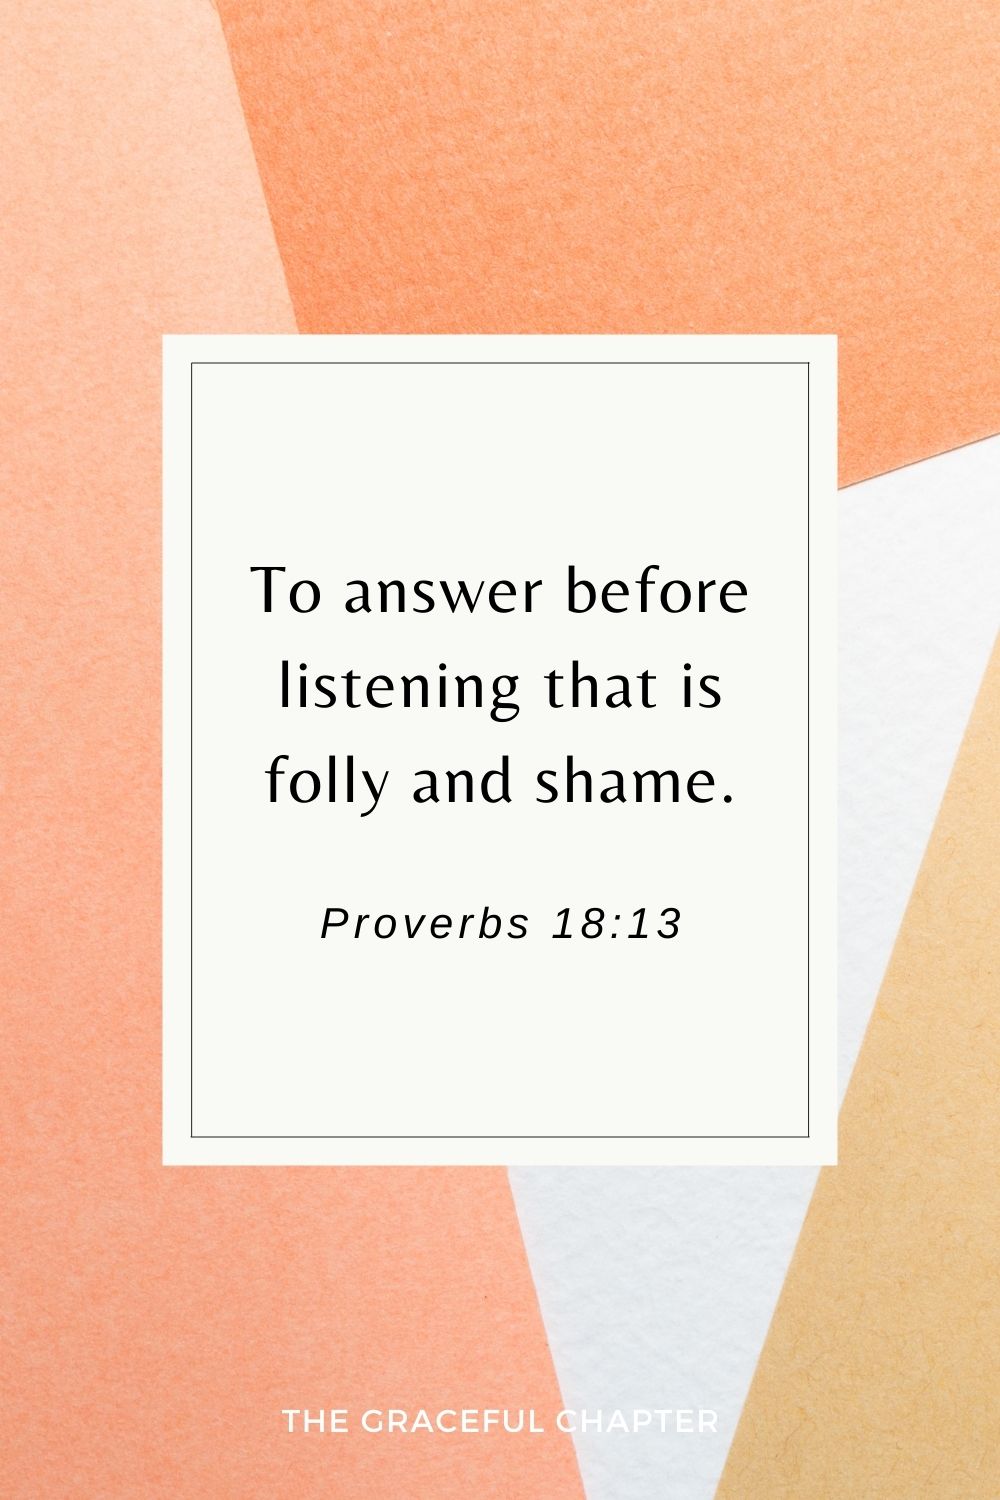 To answer before listening that is folly and shame. Proverbs 18:13